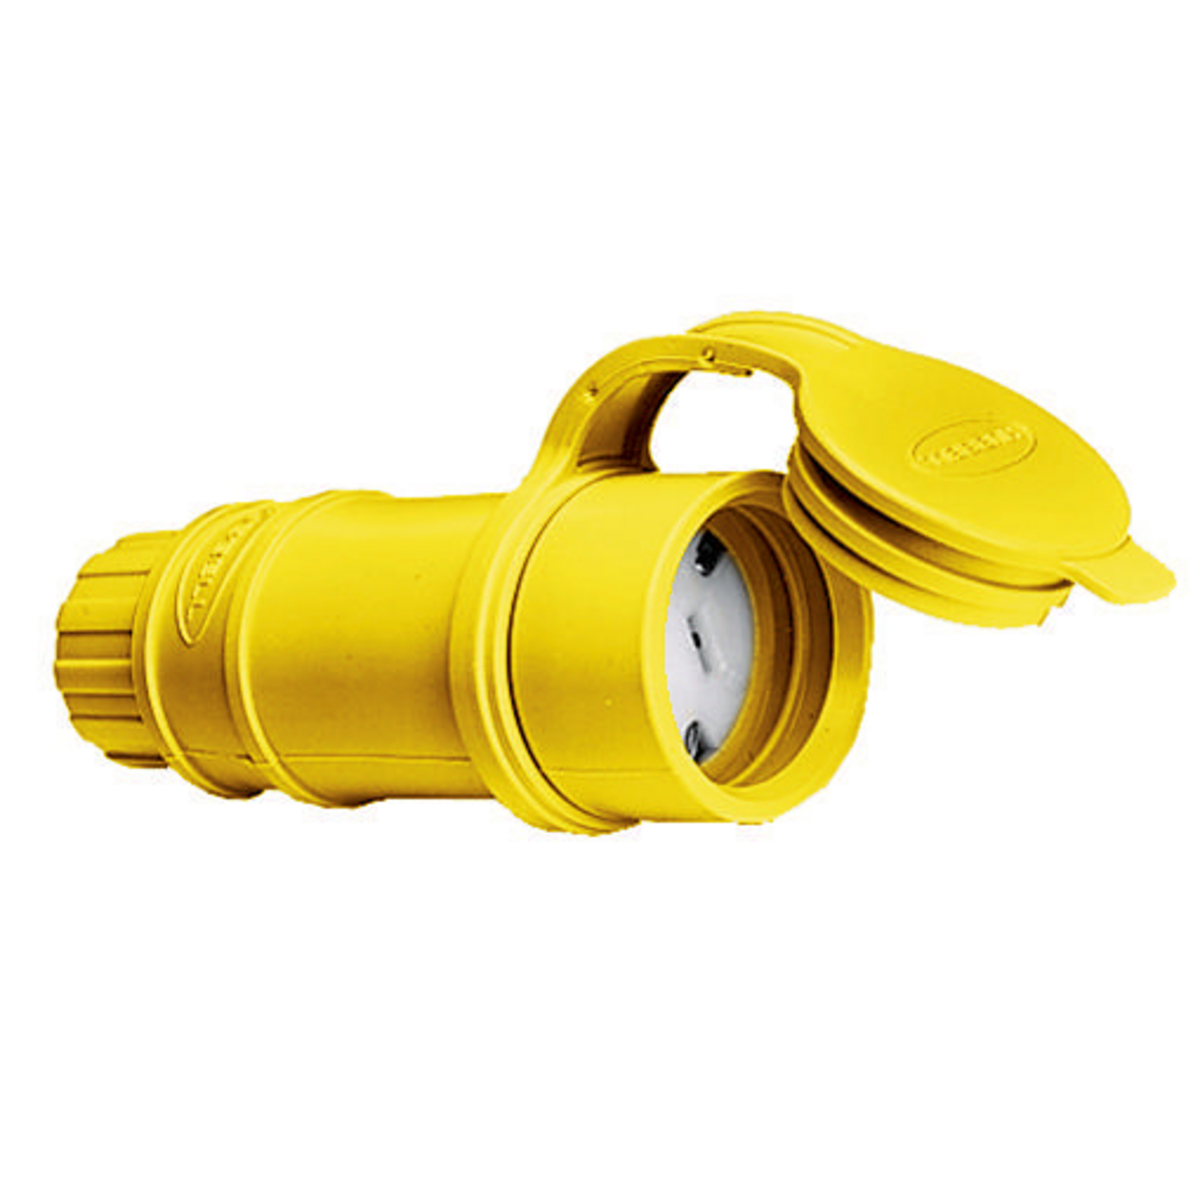 Hubbell Yellow Female Watertight Straight Blade Connector 5-15R 15A 125V 15W47